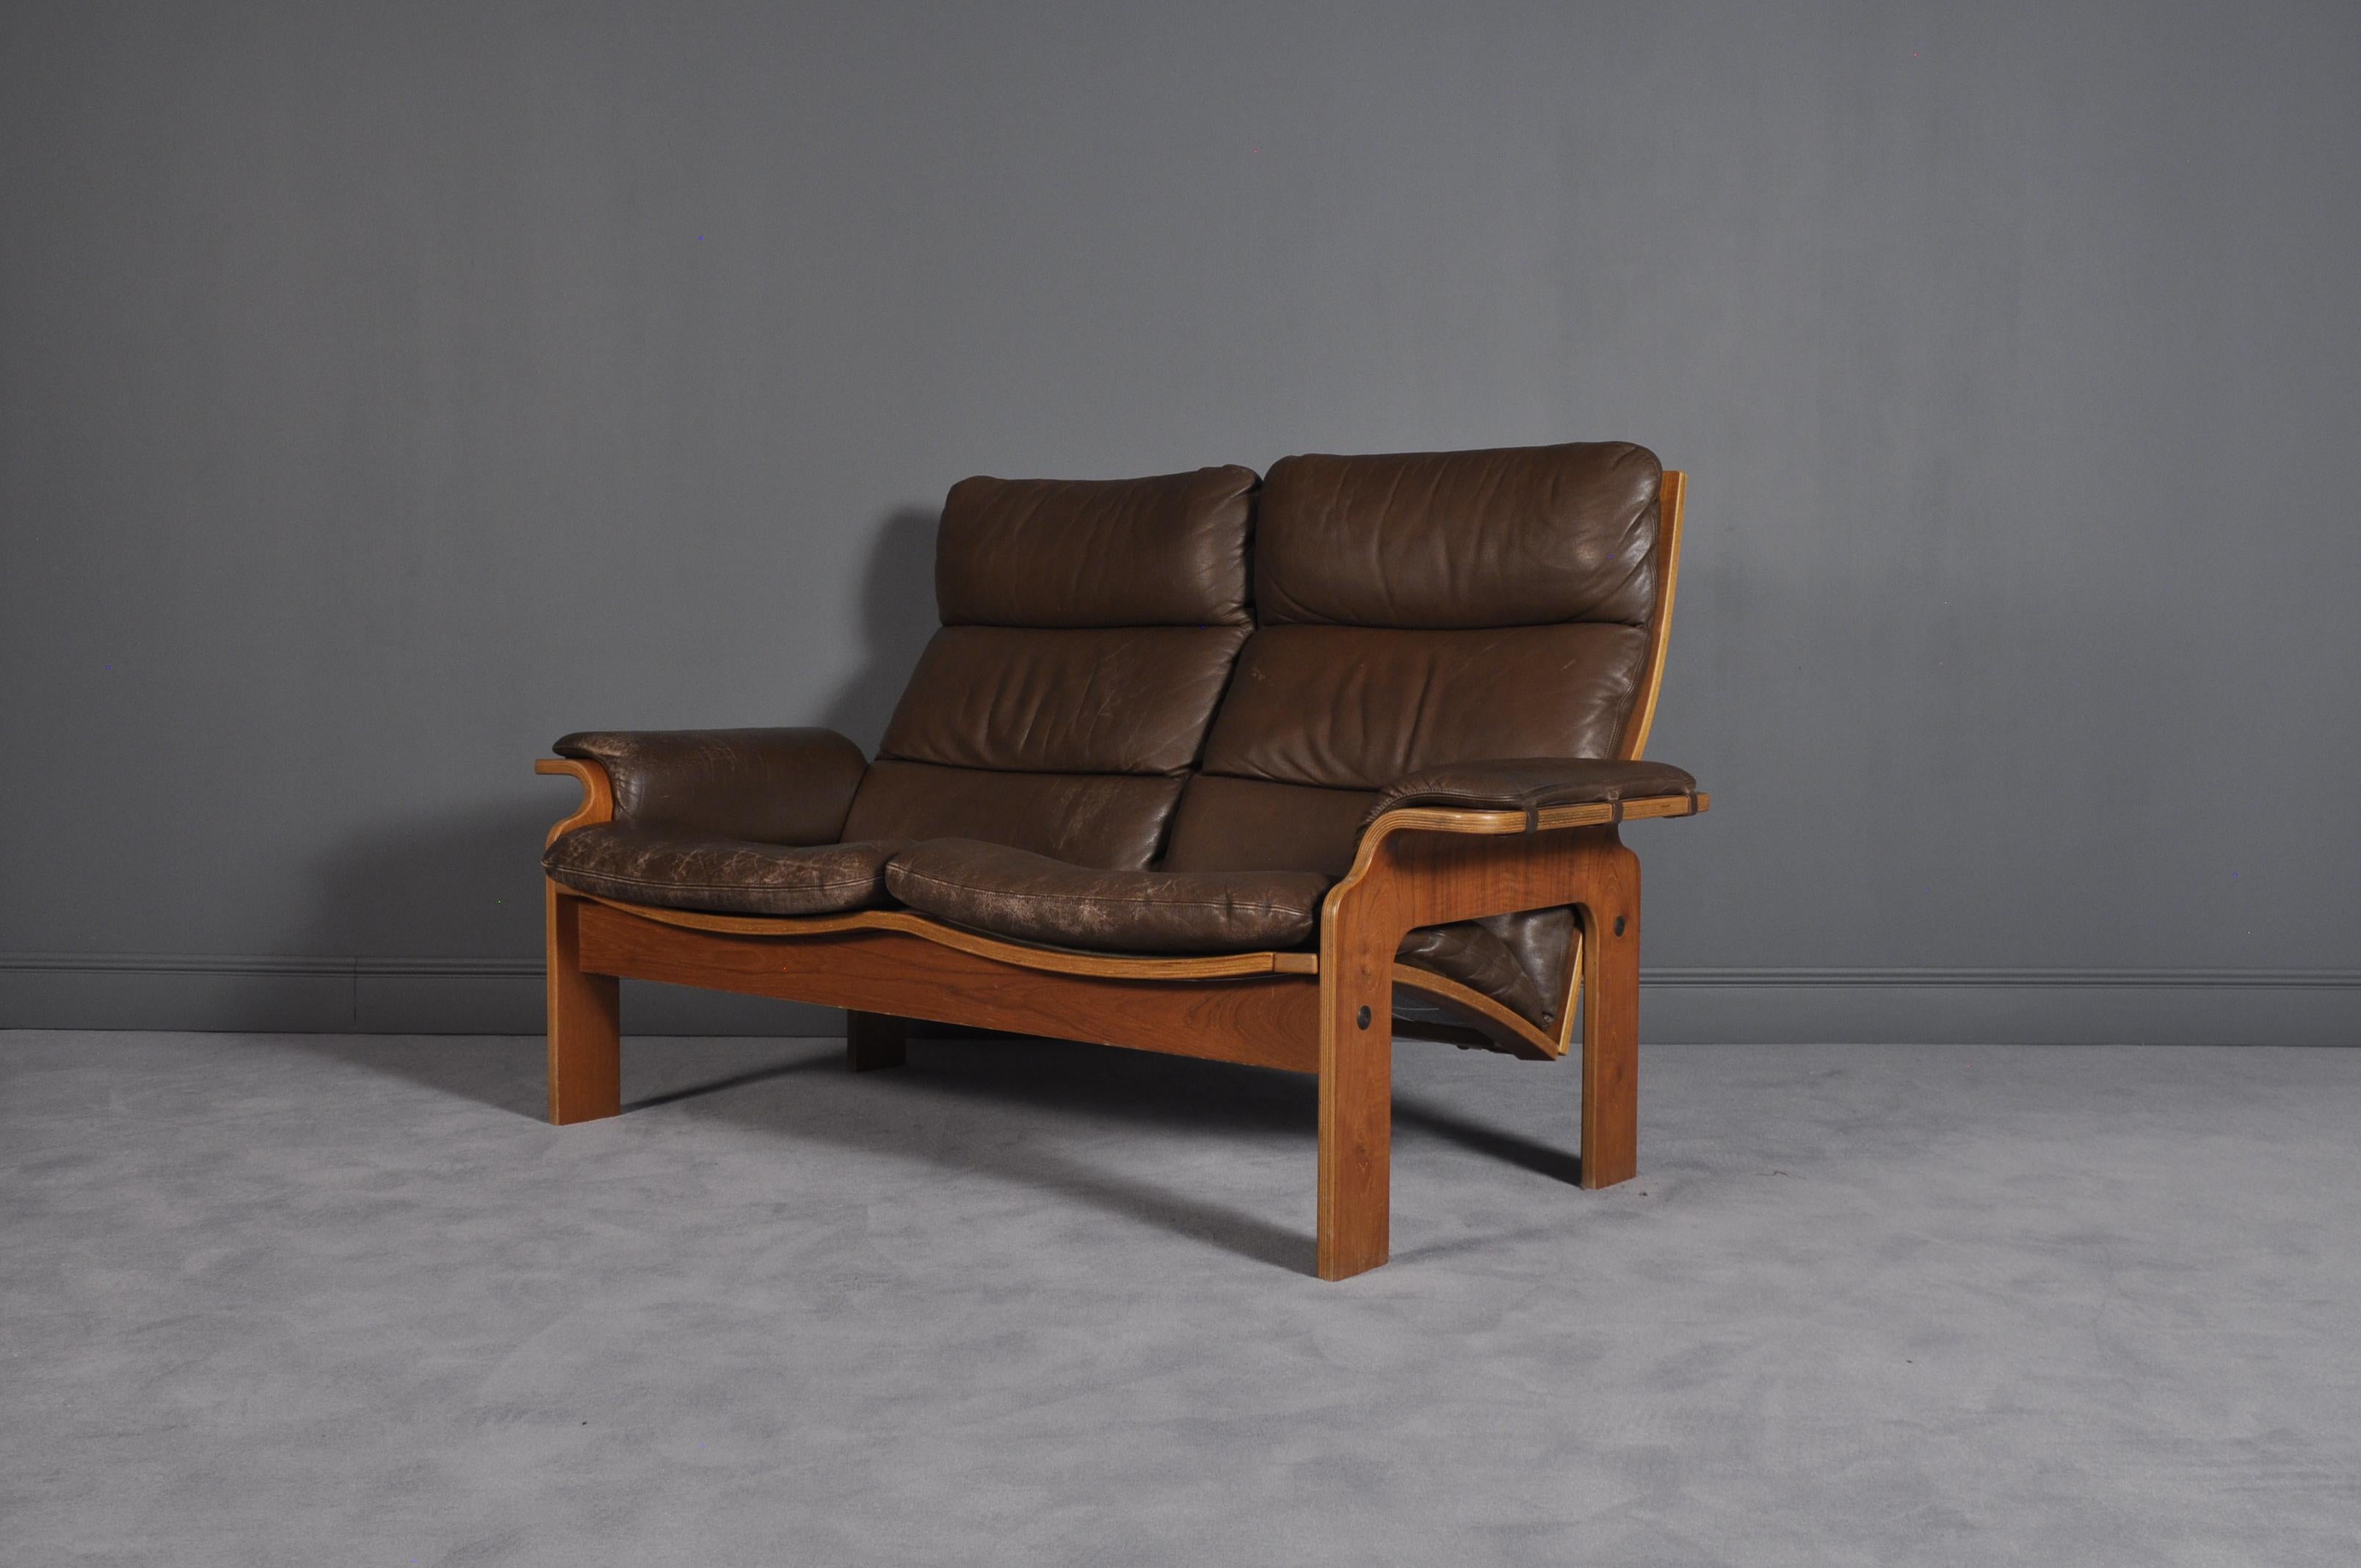 This two-seat brown leather sofa was made by a Norwegian furniture producer. It features an organic shape.